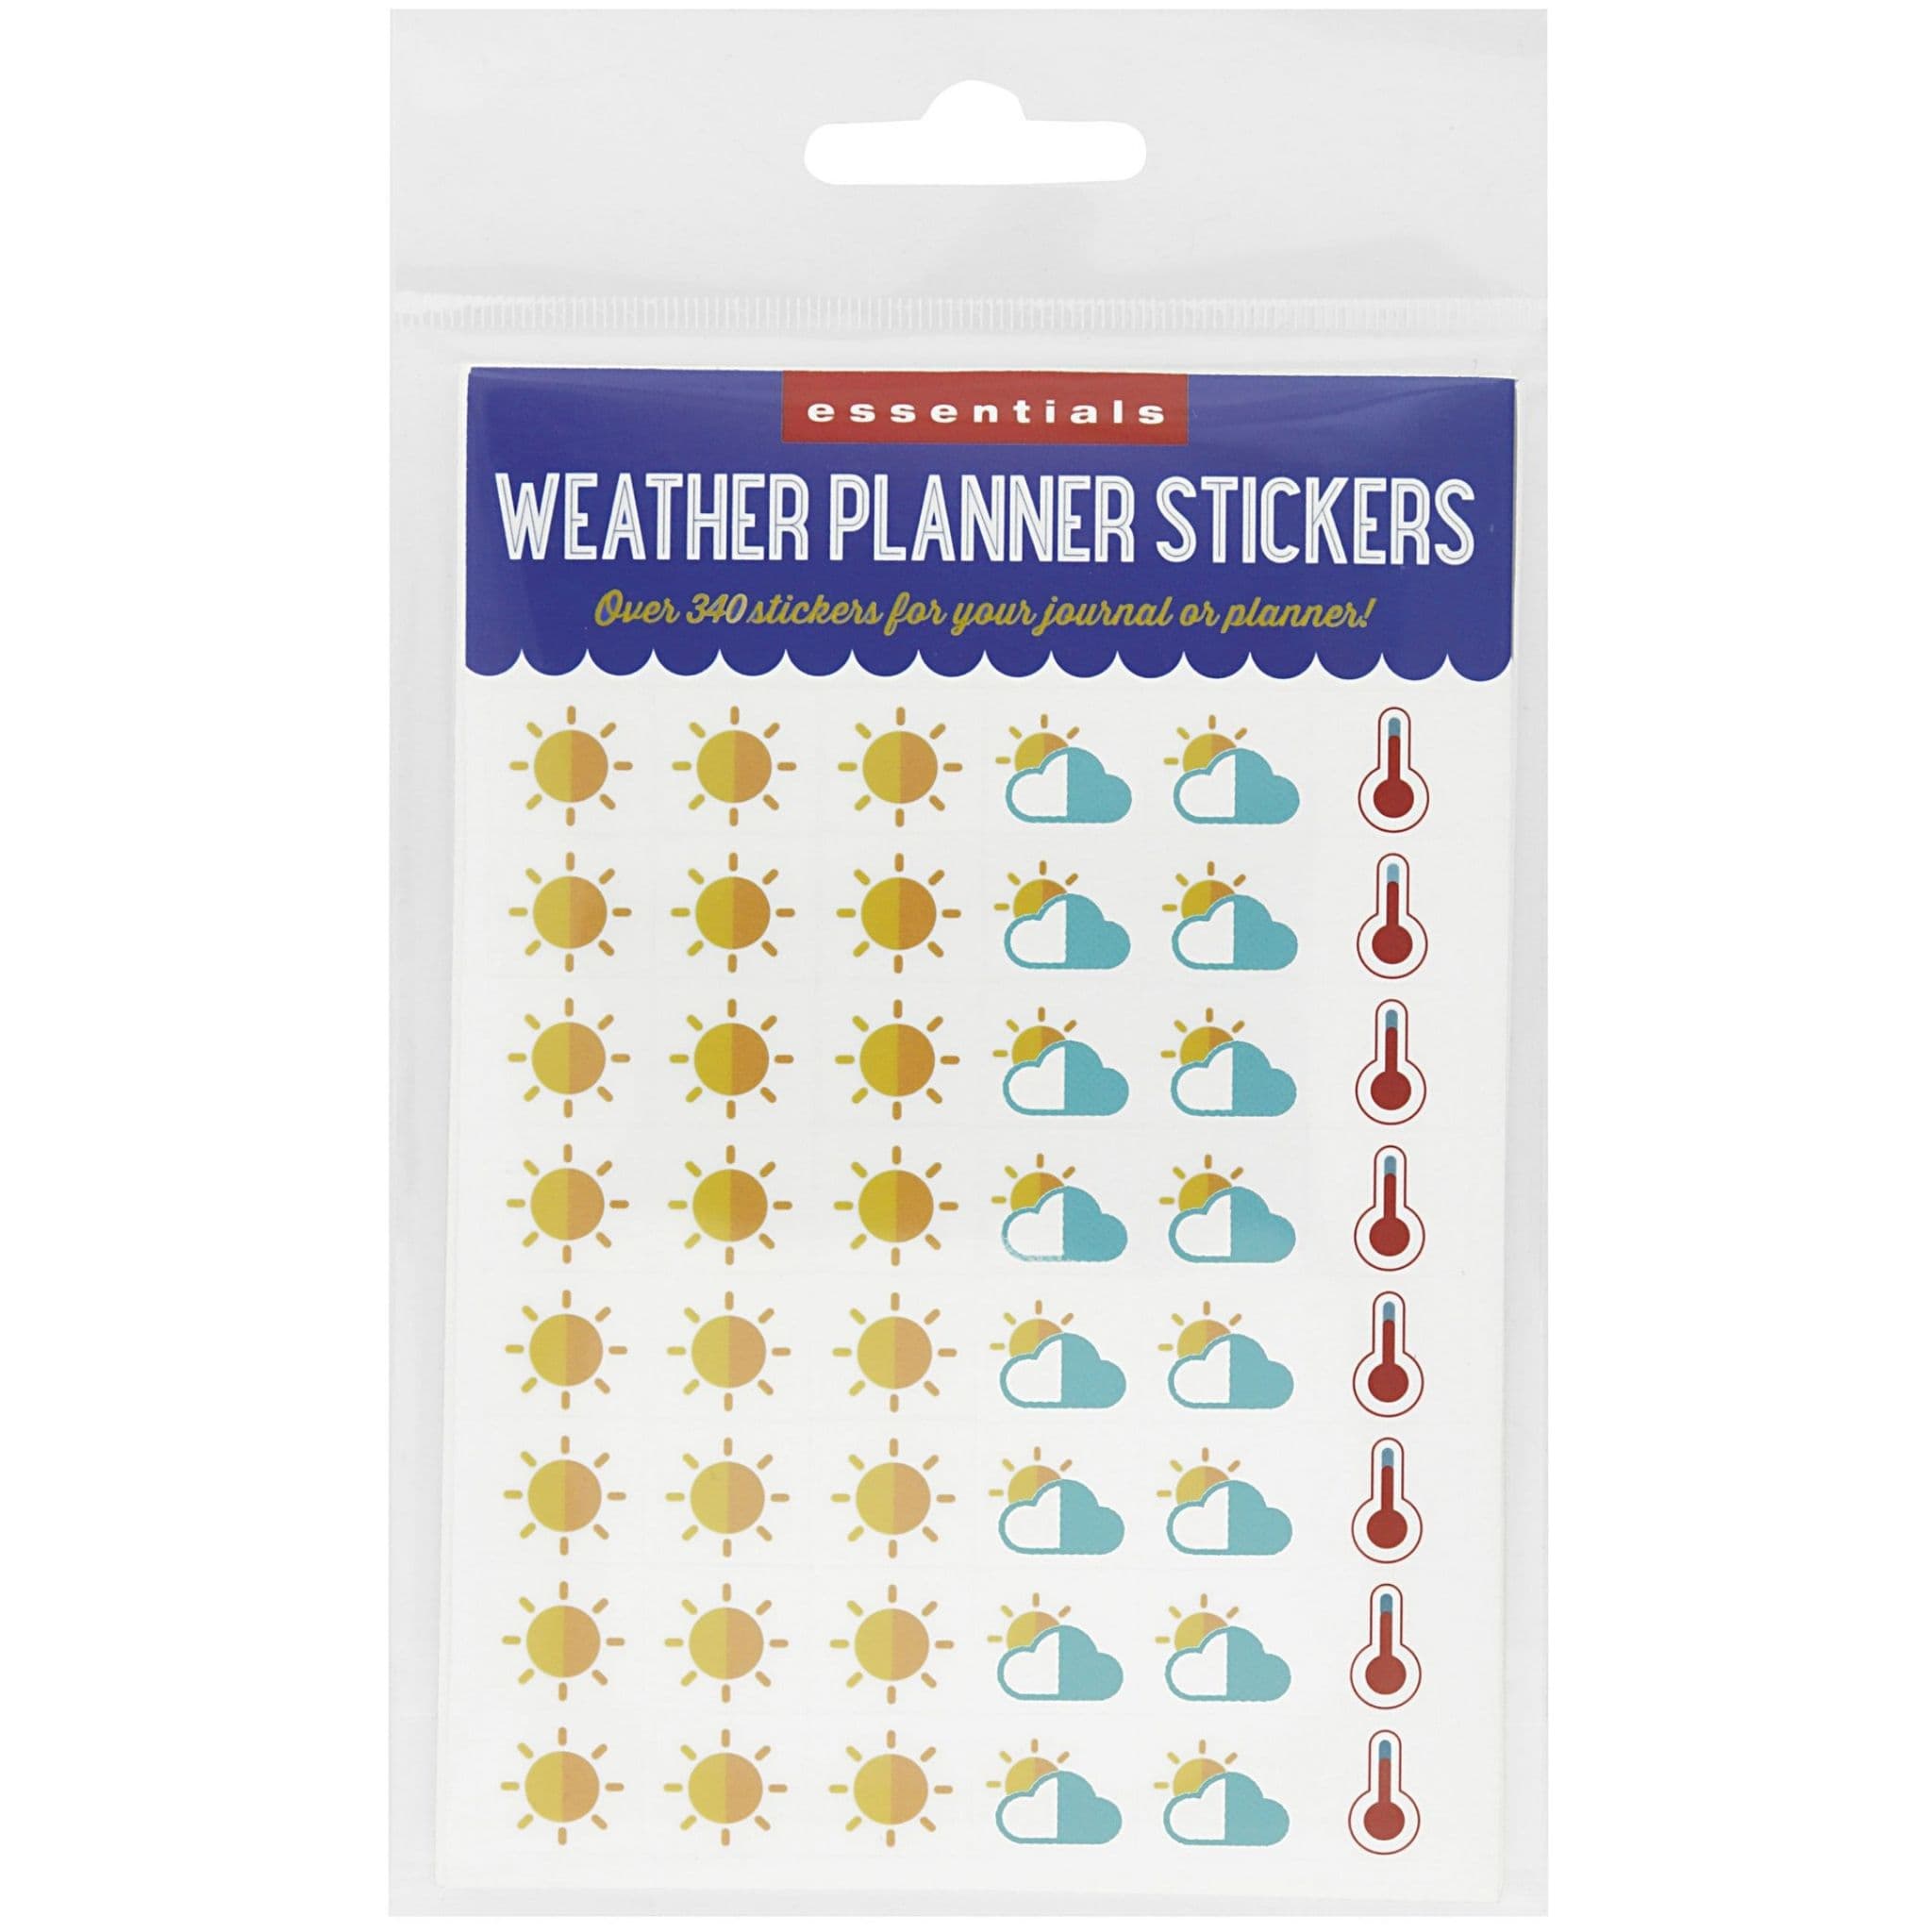 essentials weather planner stickers whole set with sun and thermometer stickers - Paper Kooka